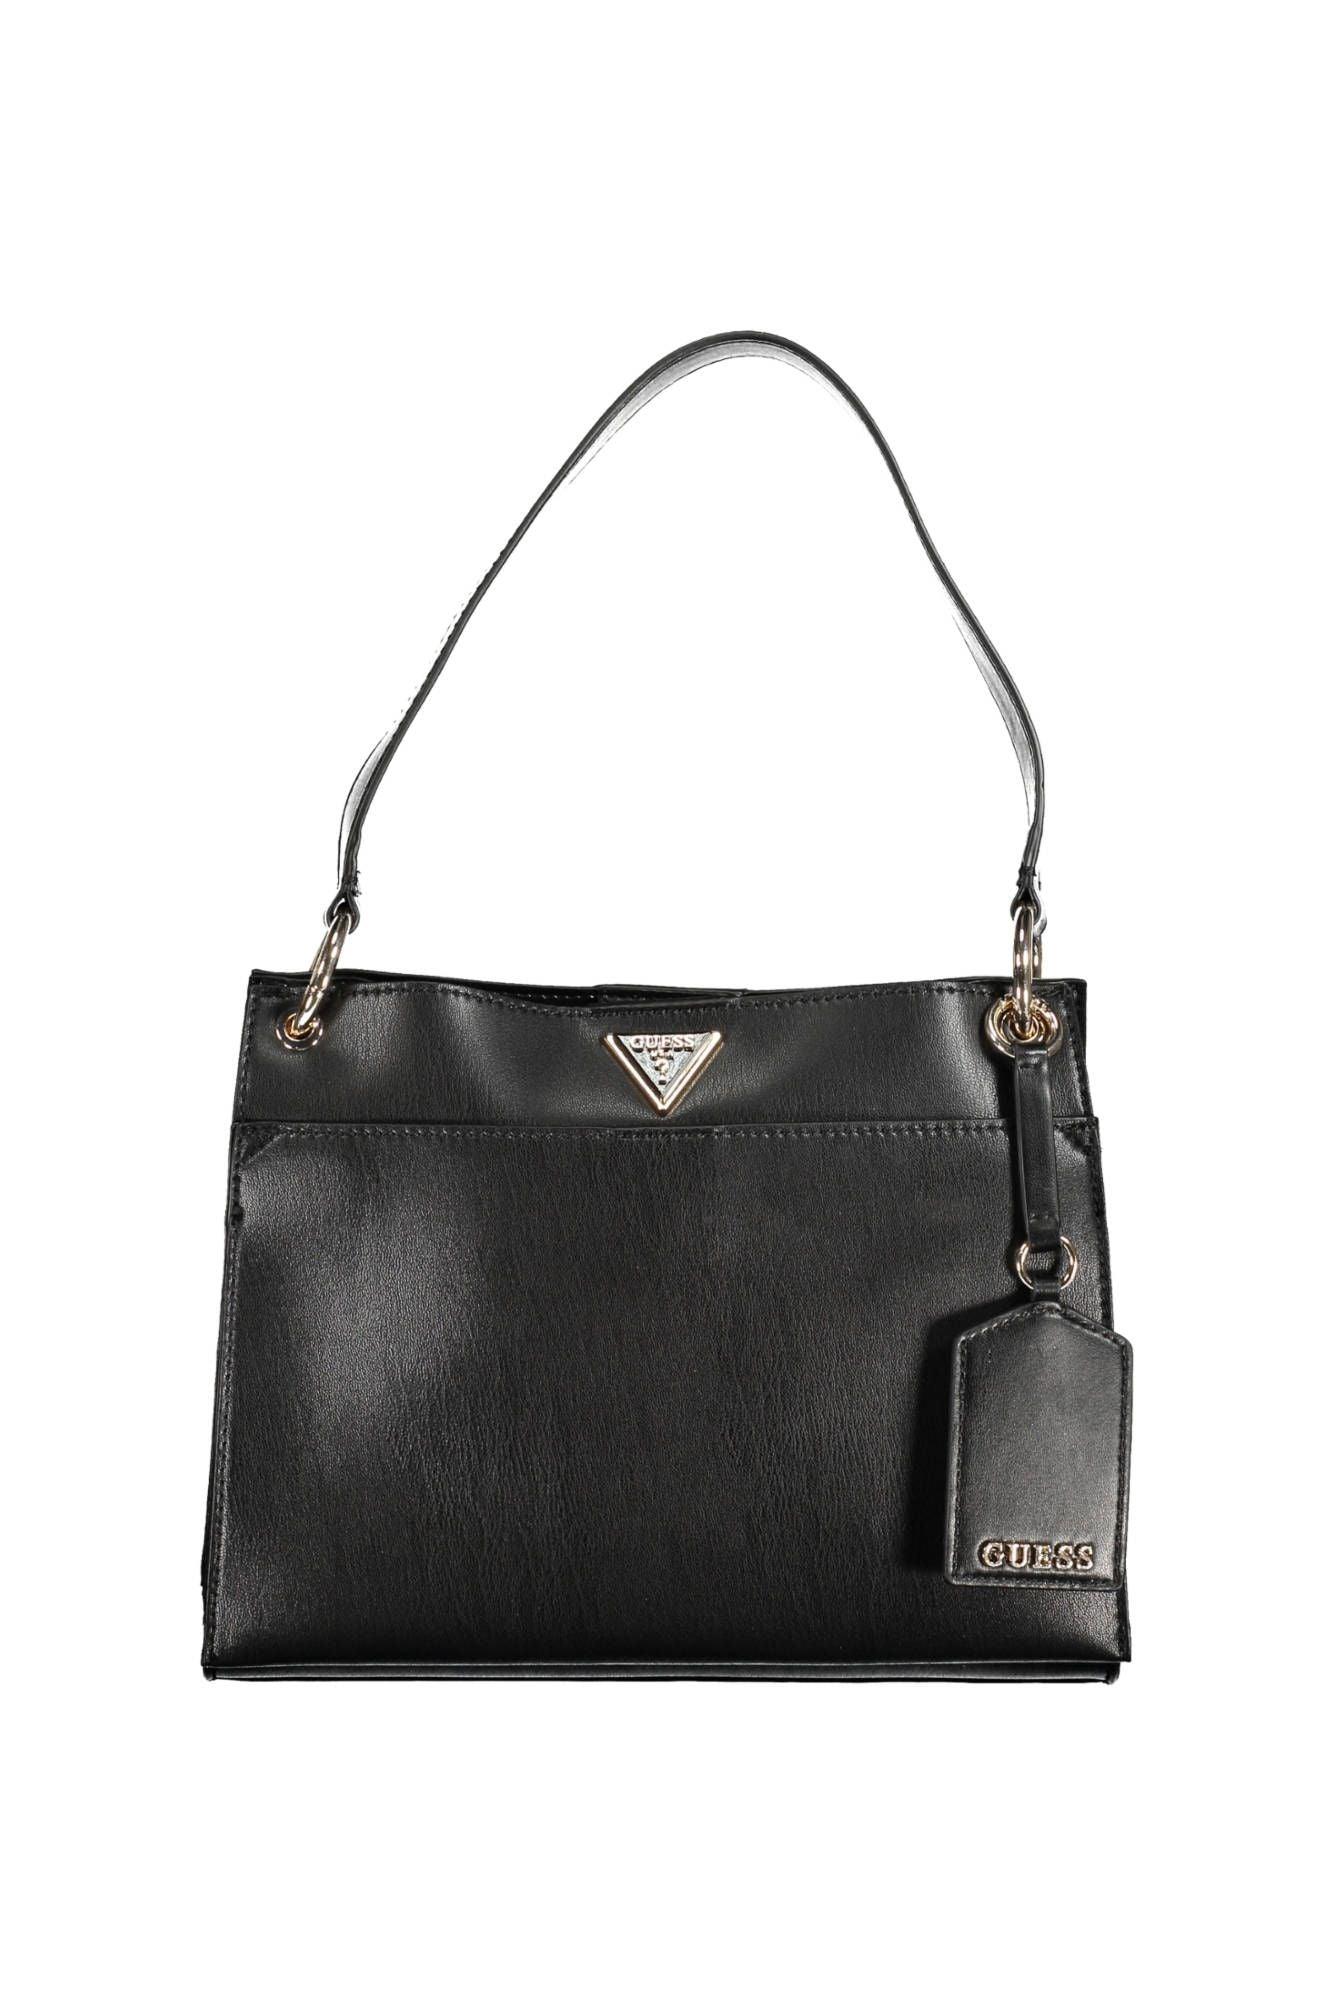 Guess Jeans Chic Black Shoulder Bag with Contrasting Details - PER.FASHION